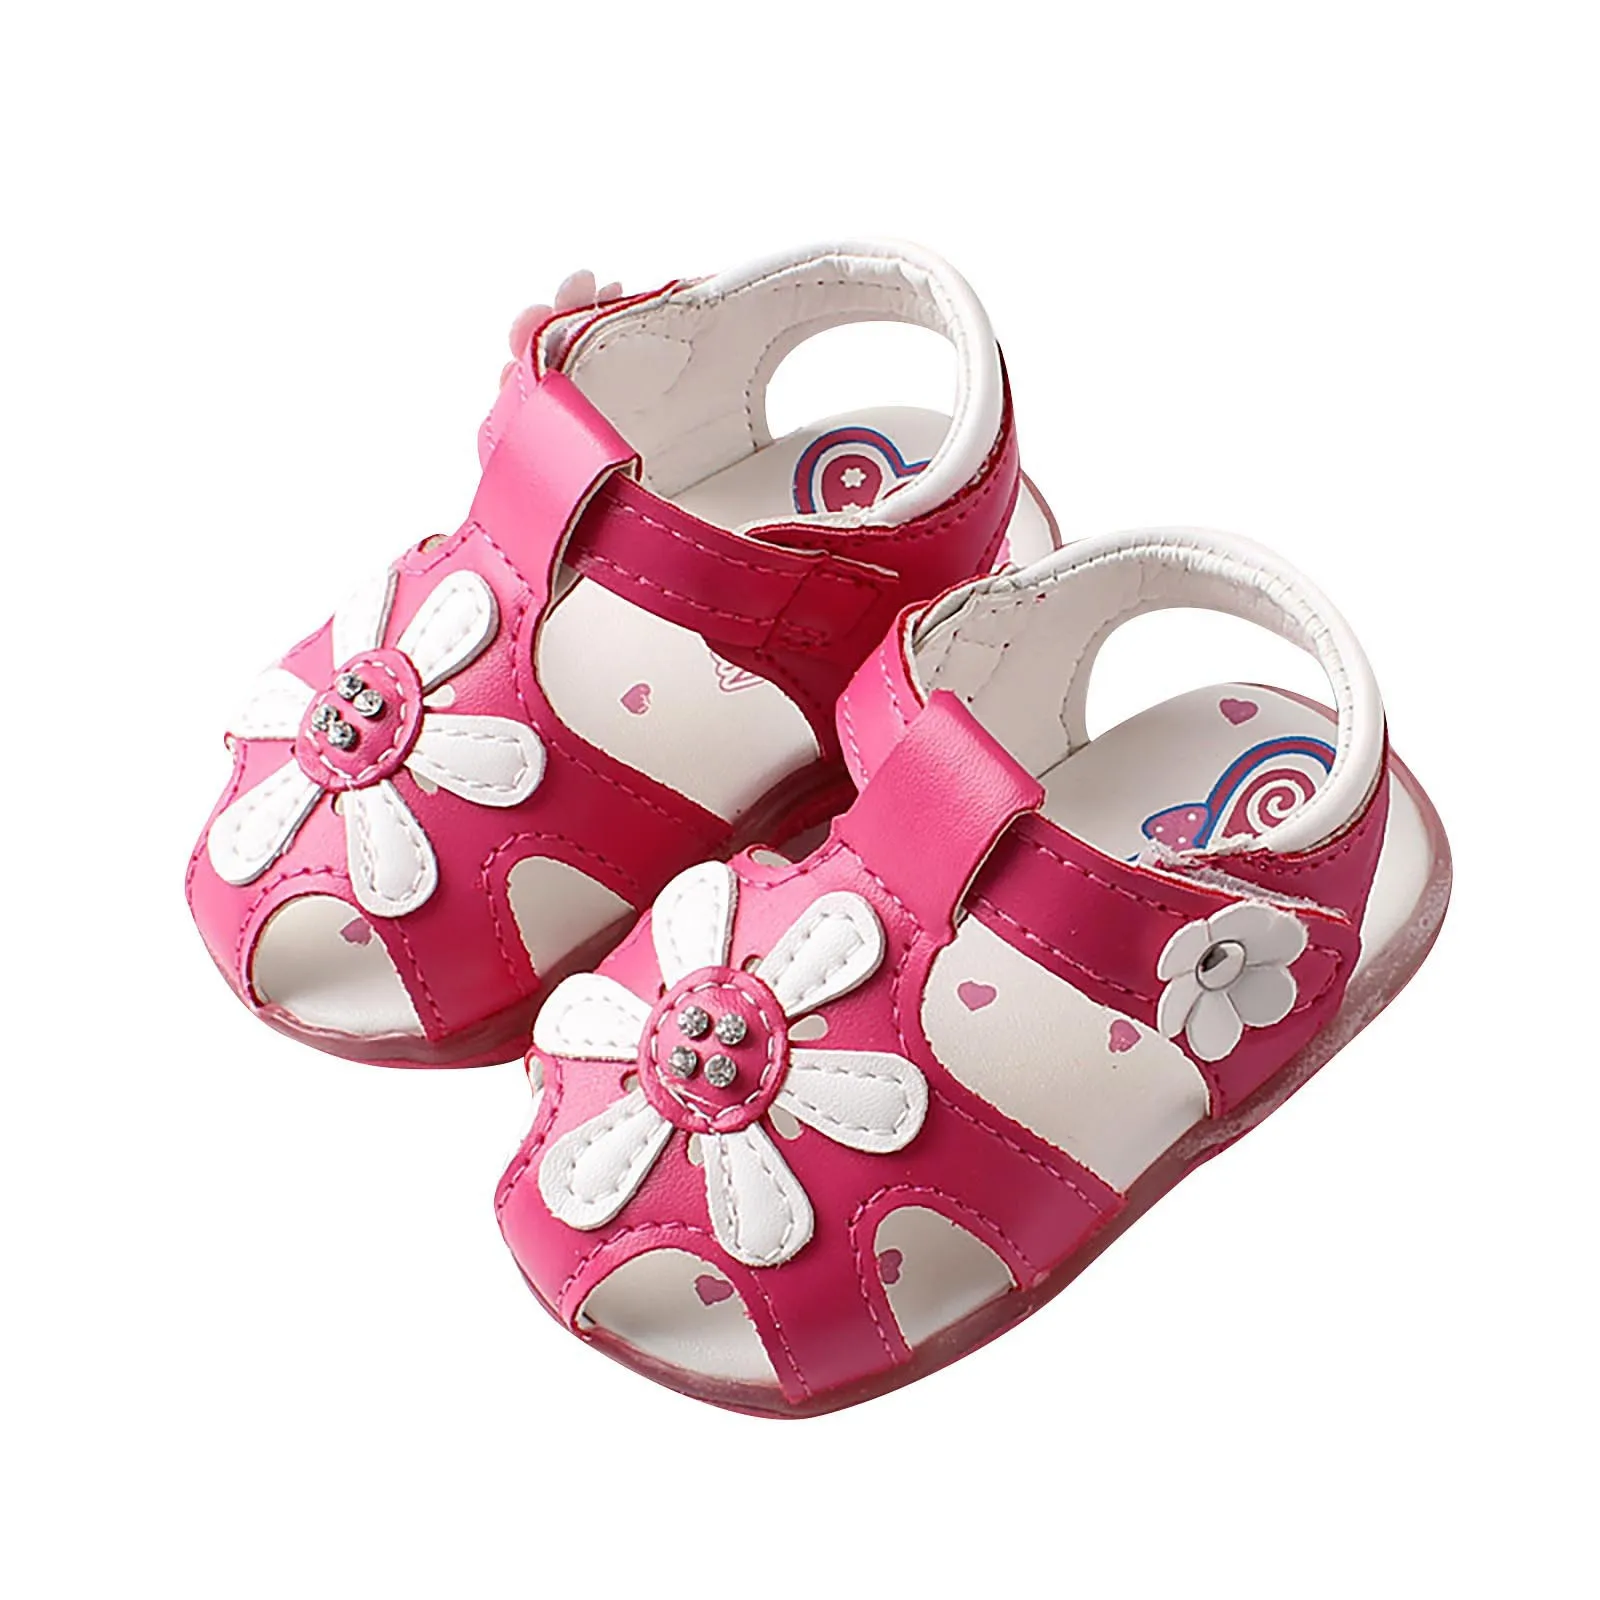 Toddler Baby Girl LED Luminous Sandals Soft Leather Summer Shoes Casual Sneakers 